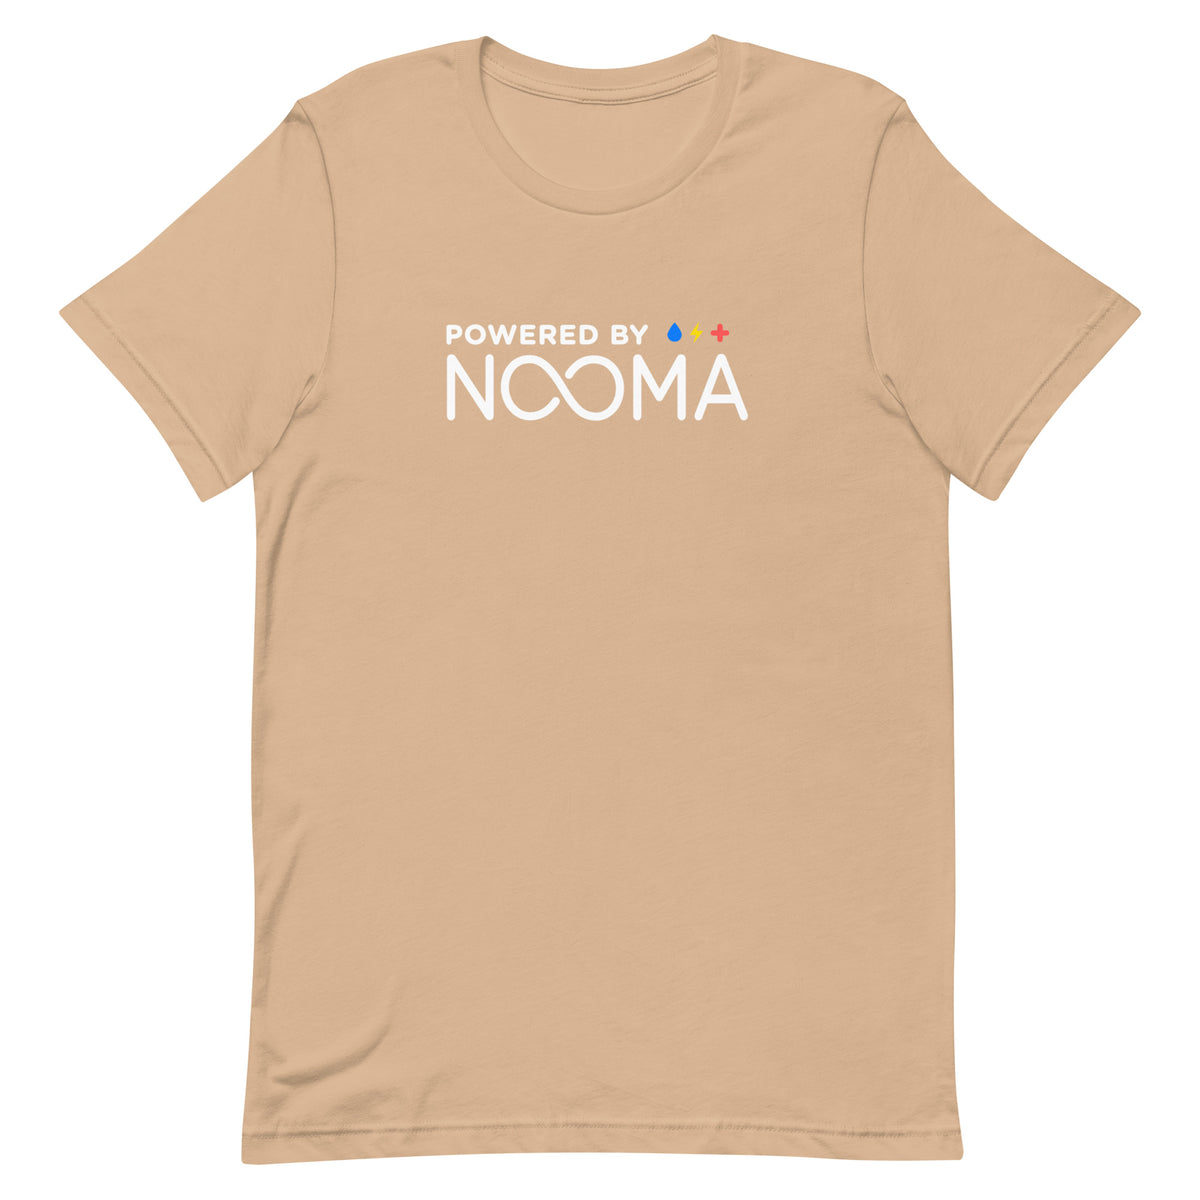 Powered by NOOMA T-Shirt